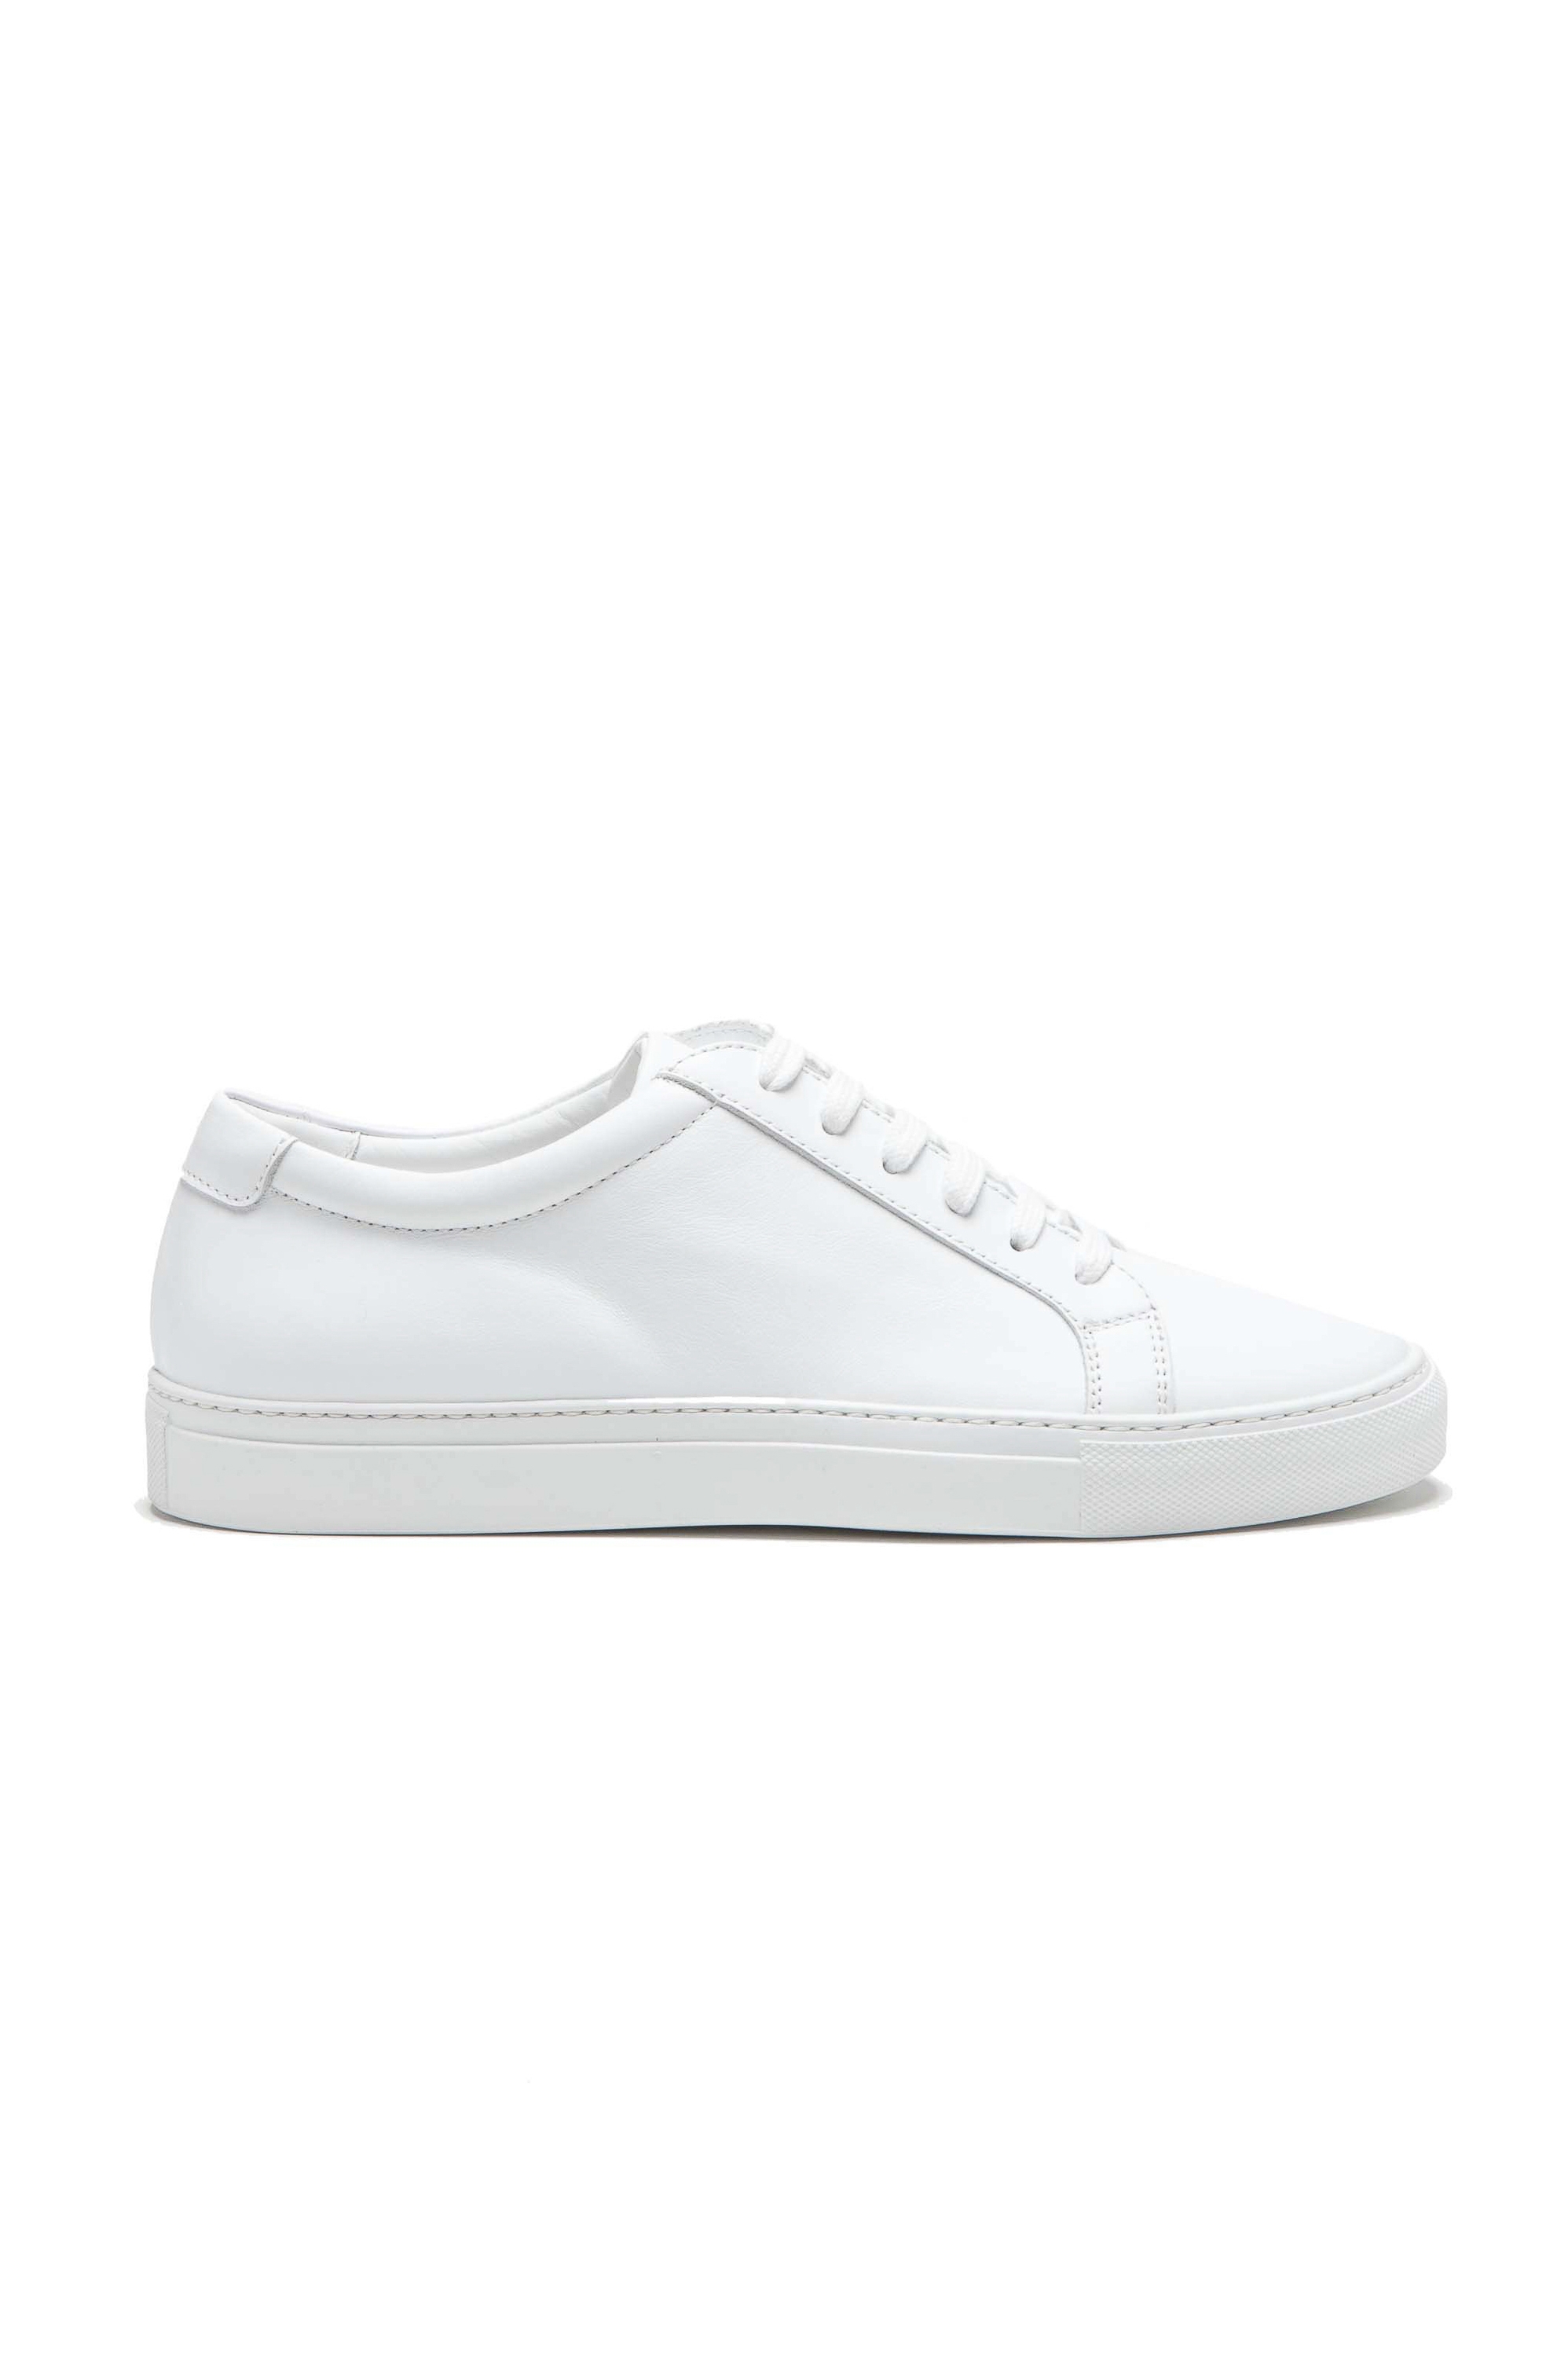 SBU 01526_2020SS Classic lace up sneakers in white calfskin leather 01